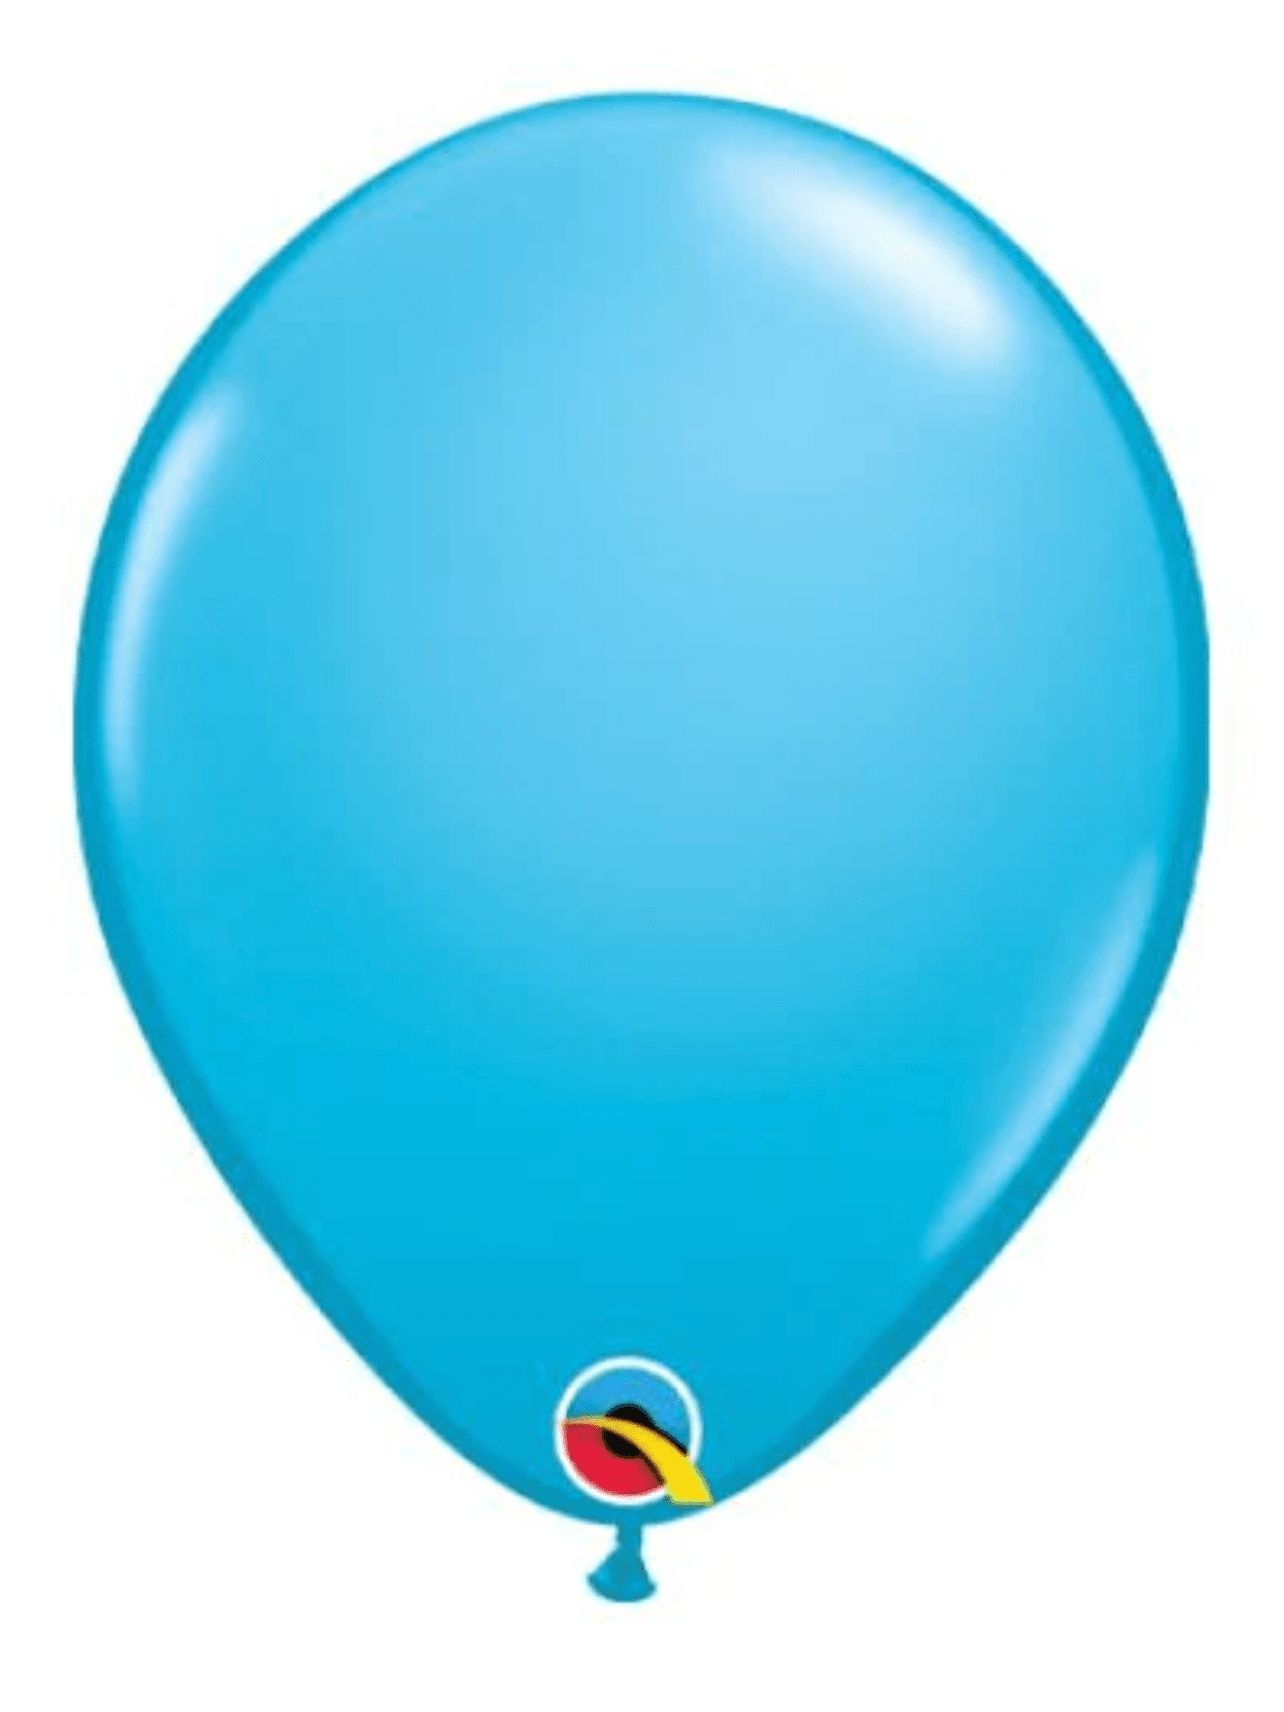 PALE BLUE -  BALLOON in Sizes - small, regular or large